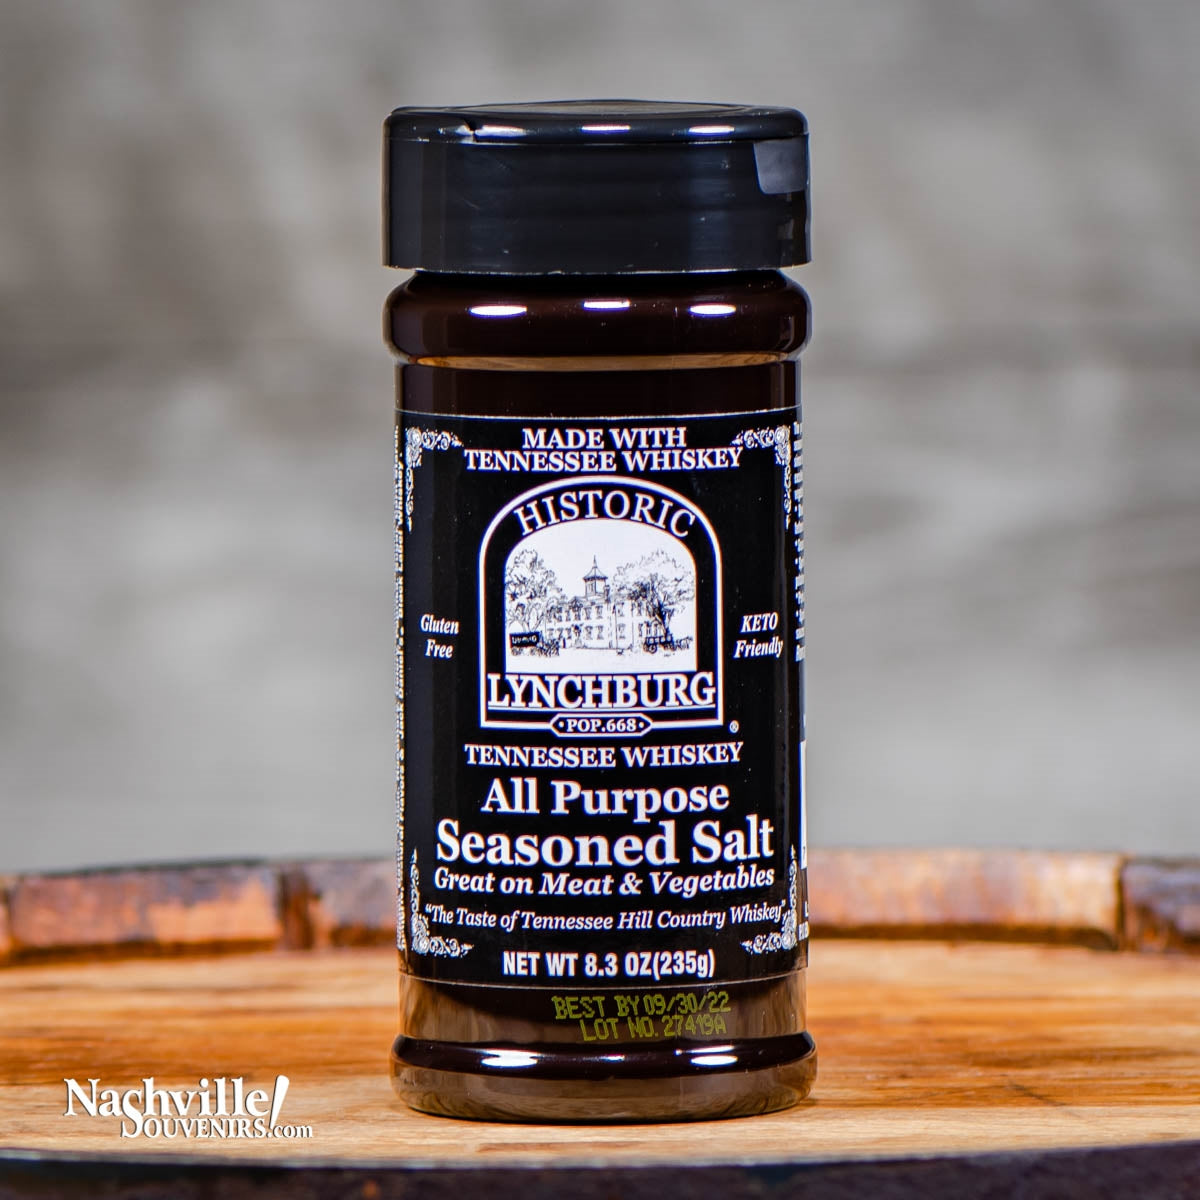 Buy Historic Lynchburg Seasoned Salt and the full line of Historic Lynchburg Tennessee Whiskey brand products. FREE SHIPPING on all US orders over $75!